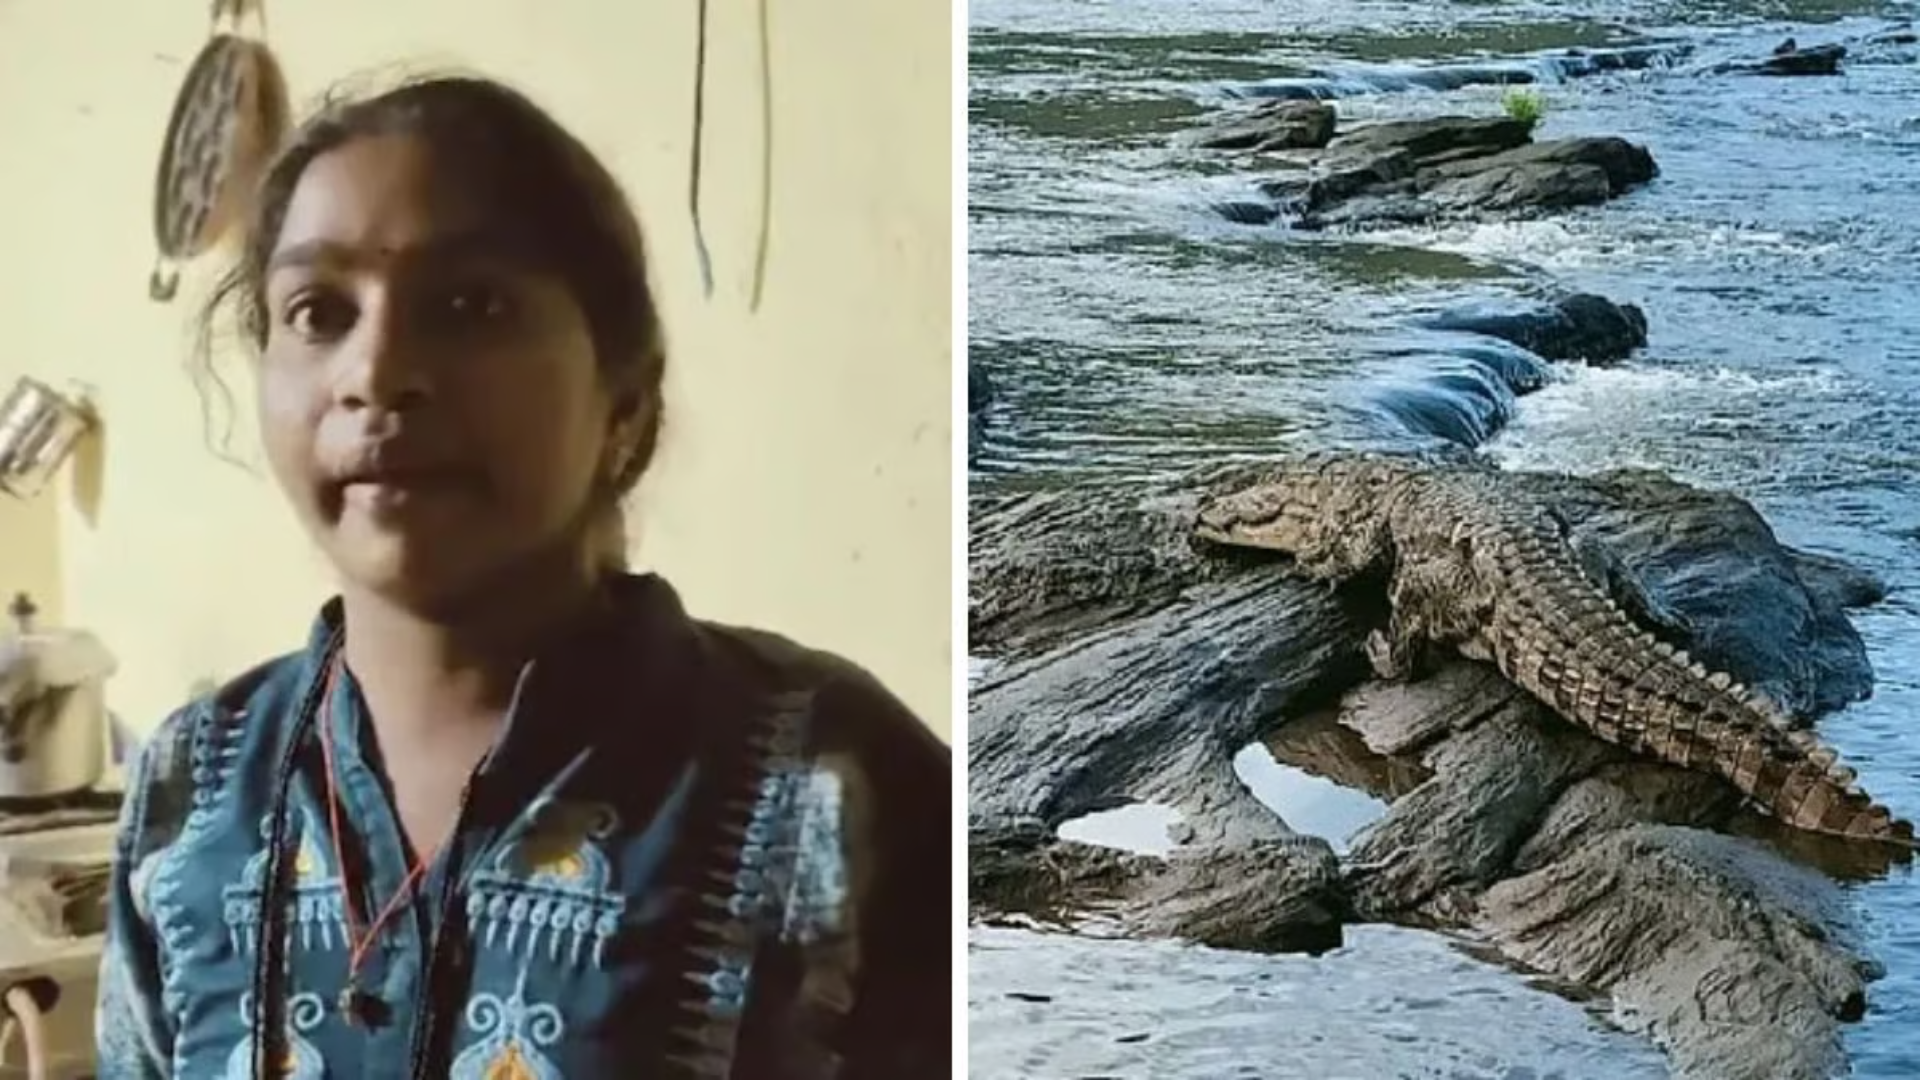 Woman Throws Special Needs Son into Crocodile-Infested Canal After Fight with Husband